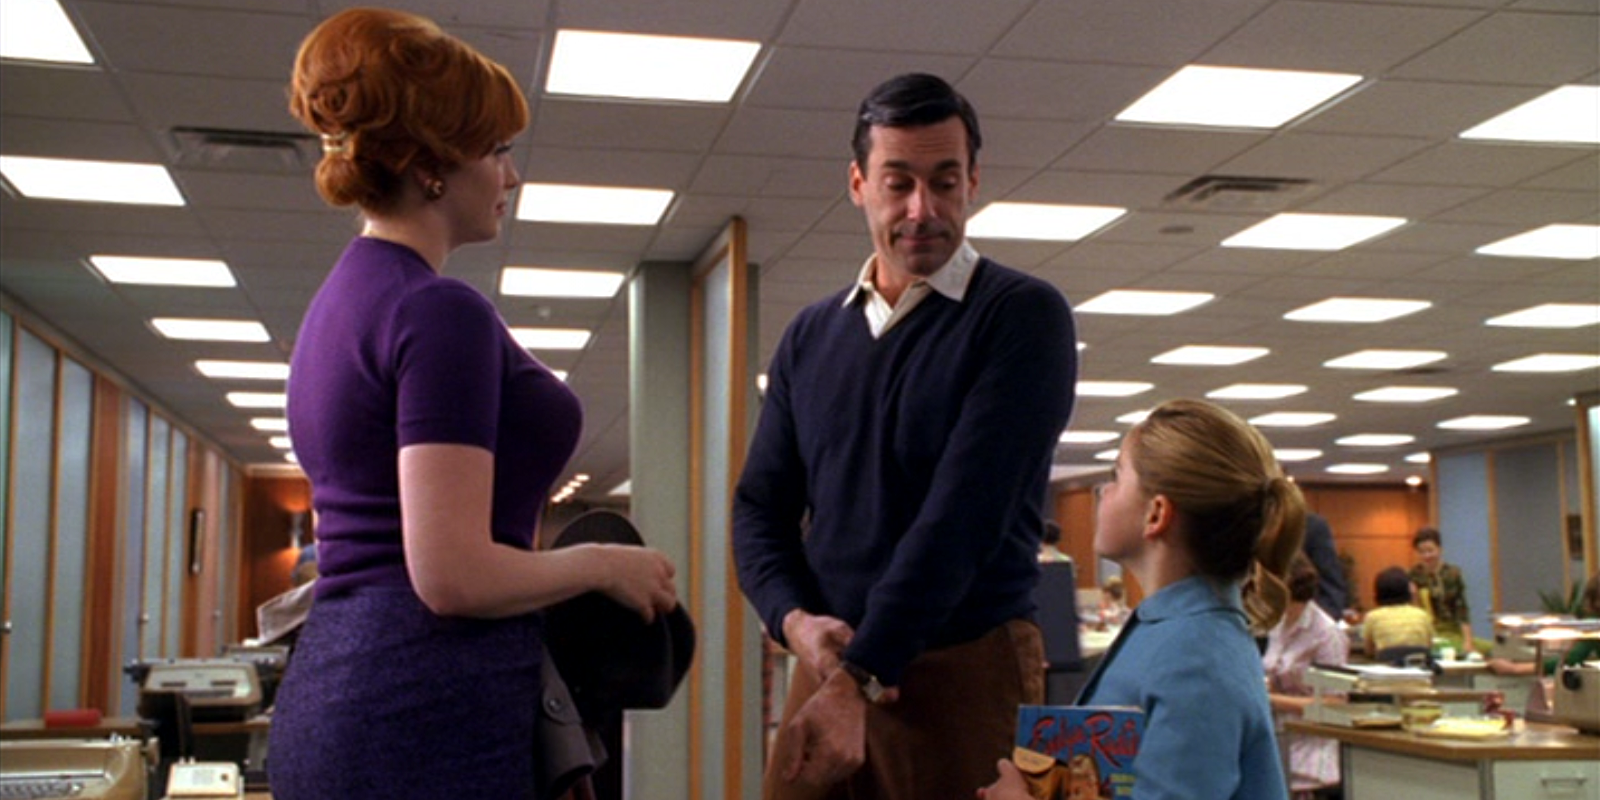 Don Draper with Sally talking to Joan in Mad Men.